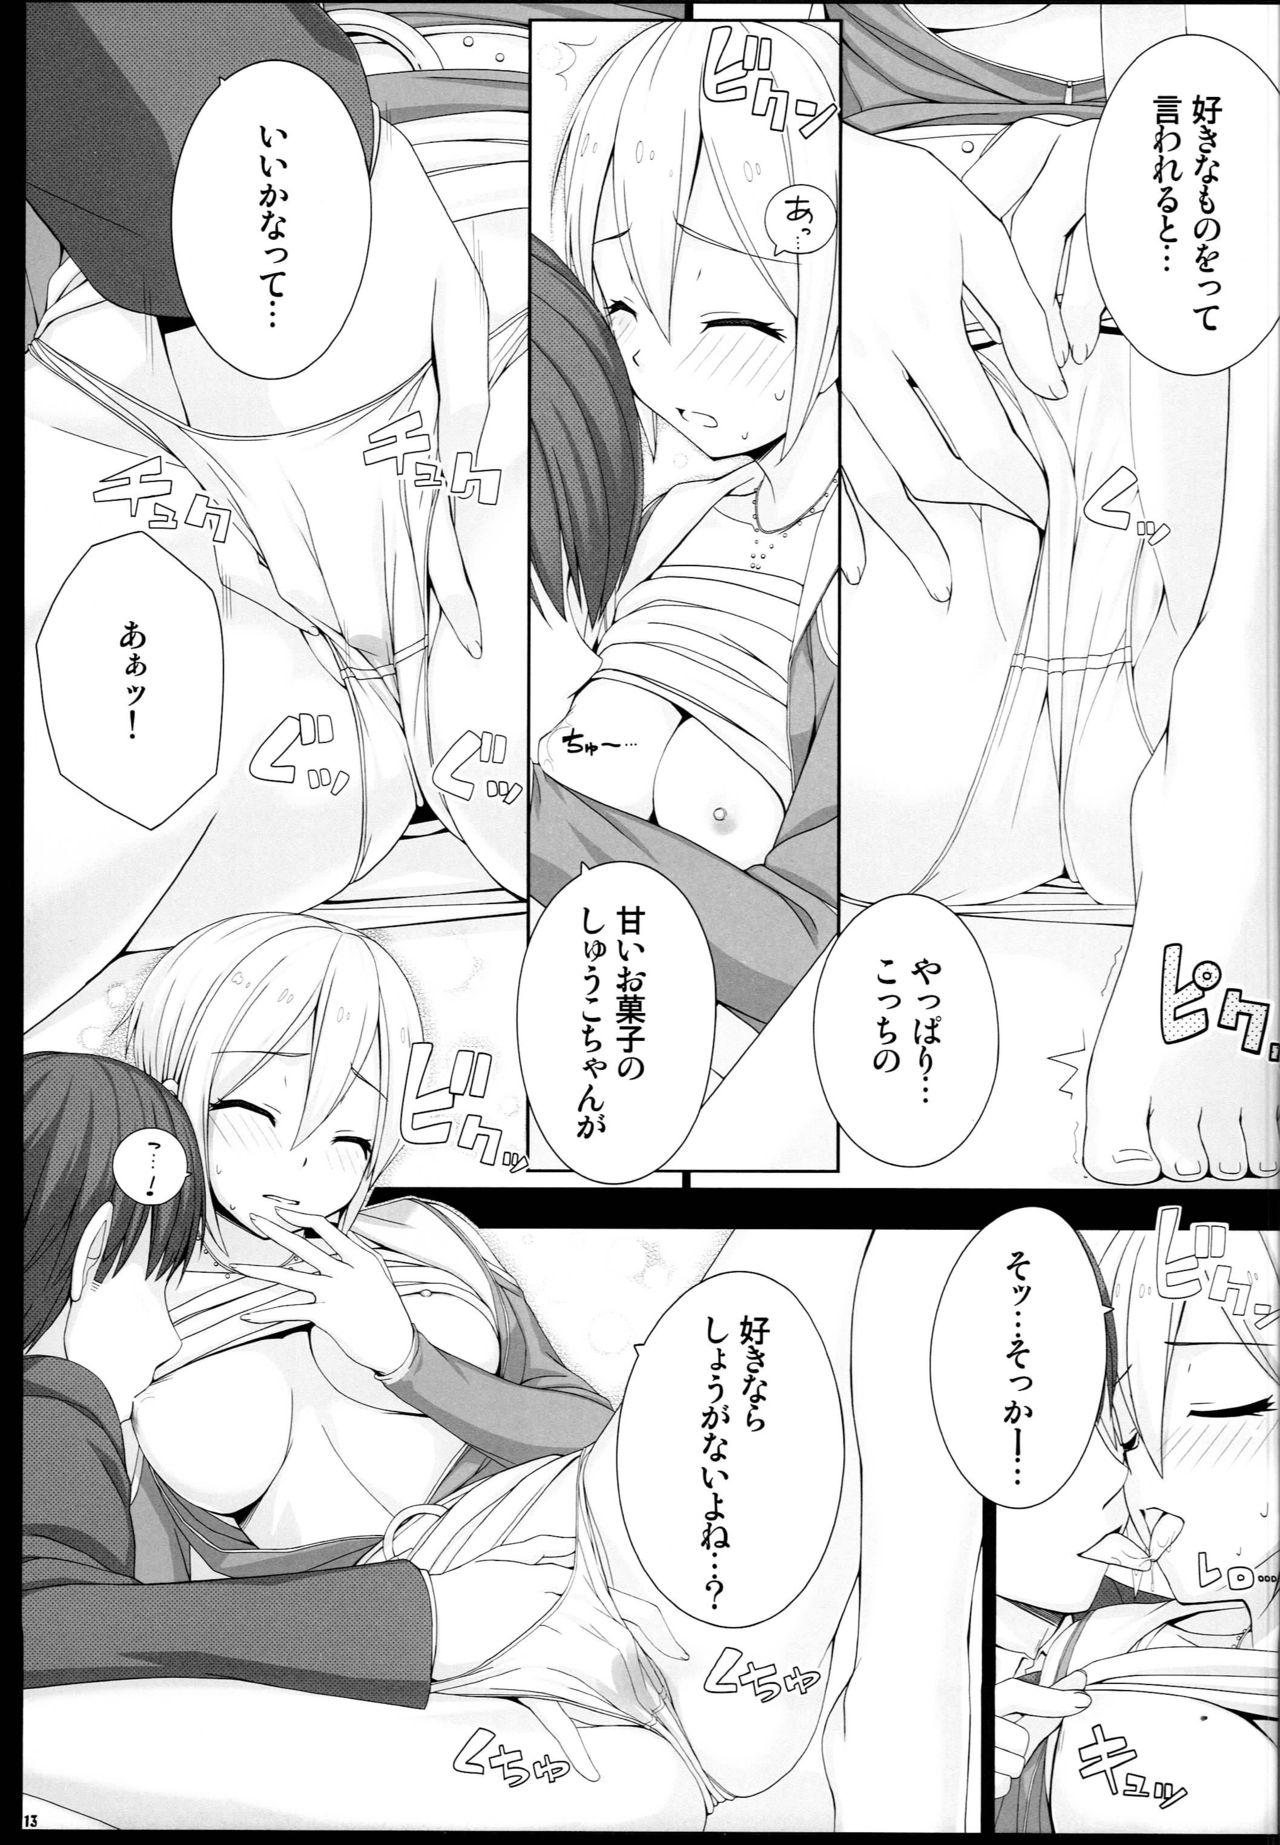 Humiliation BAD COMMUNICATION? 18 - The idolmaster Livecam - Page 12